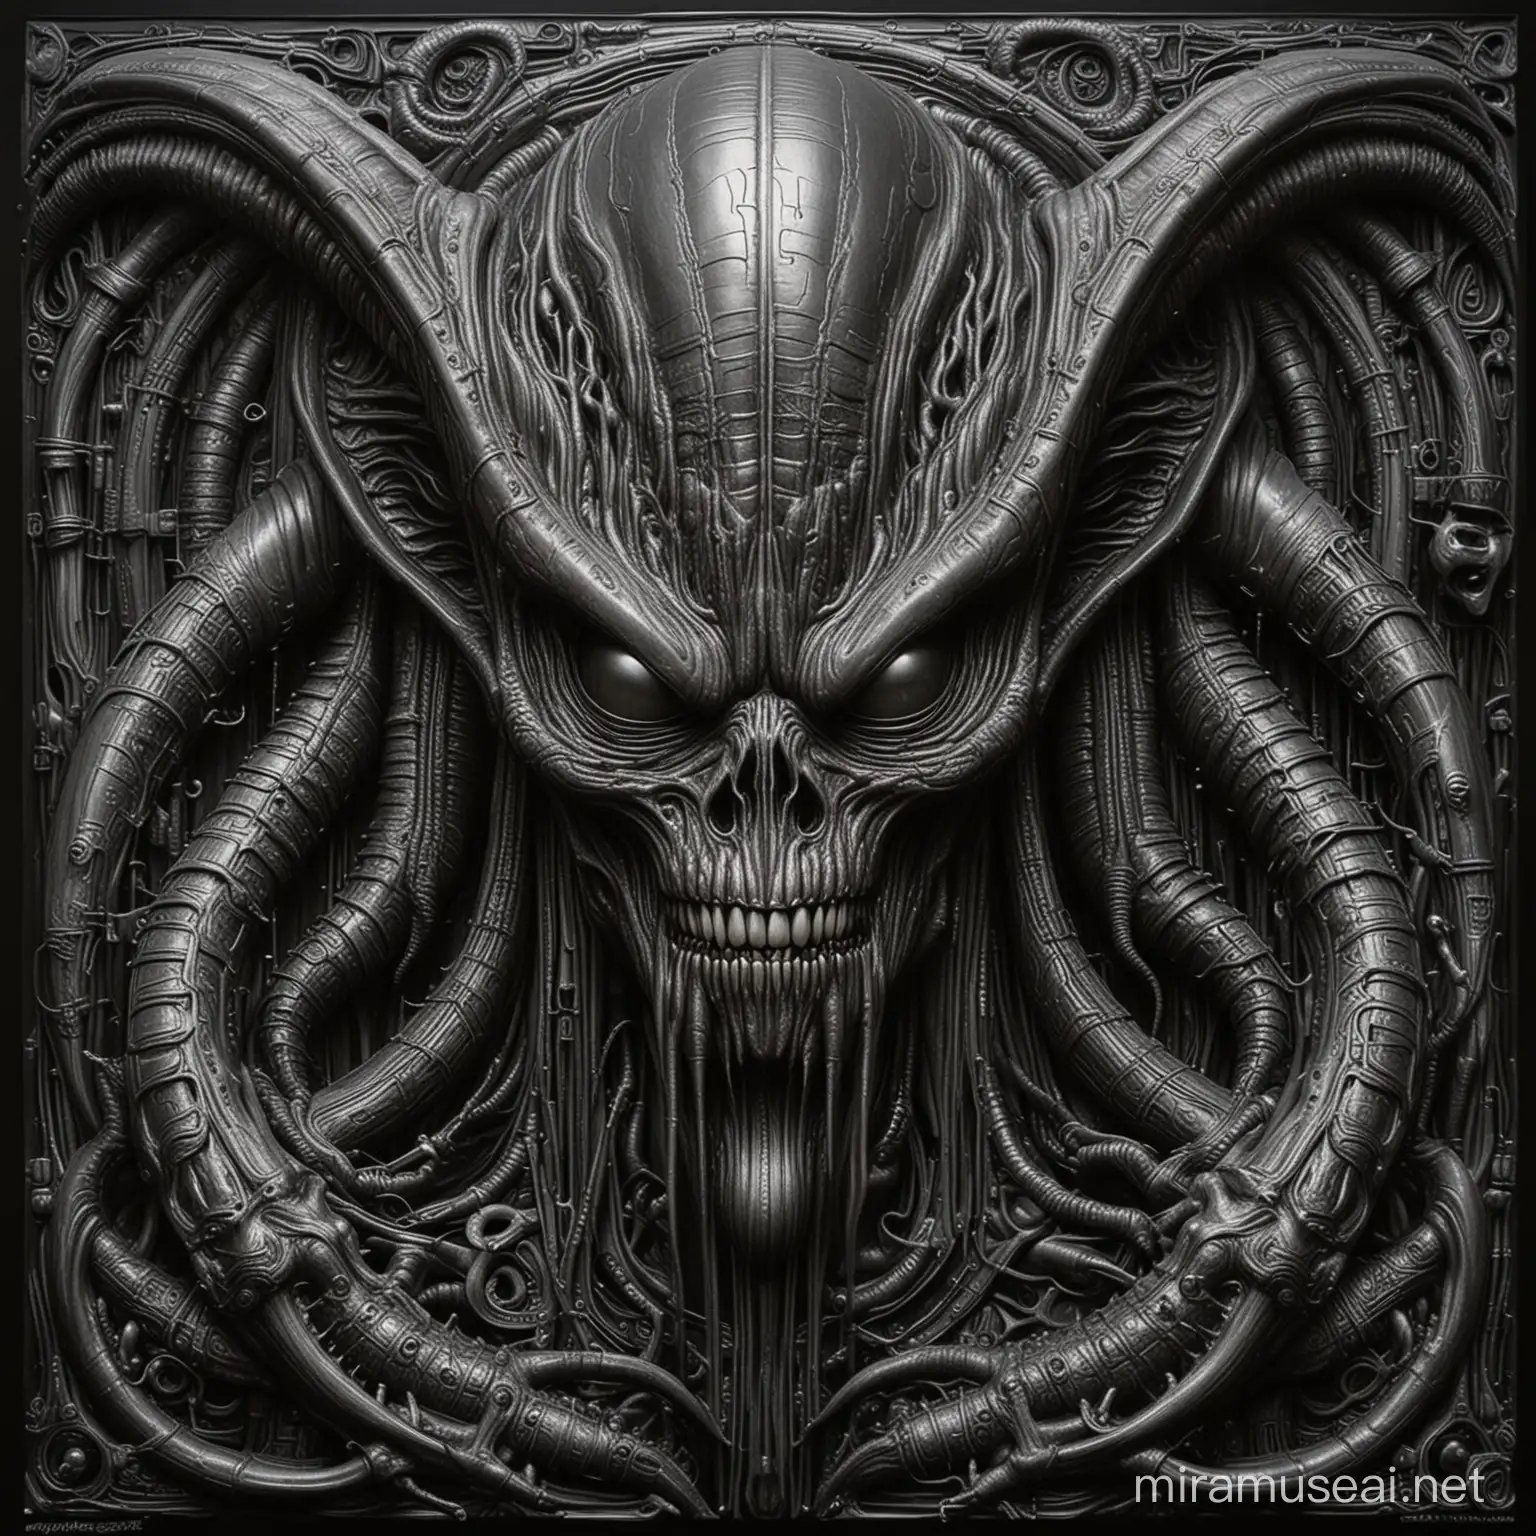 the giger alien done in the style of big daddy roth and rat fink